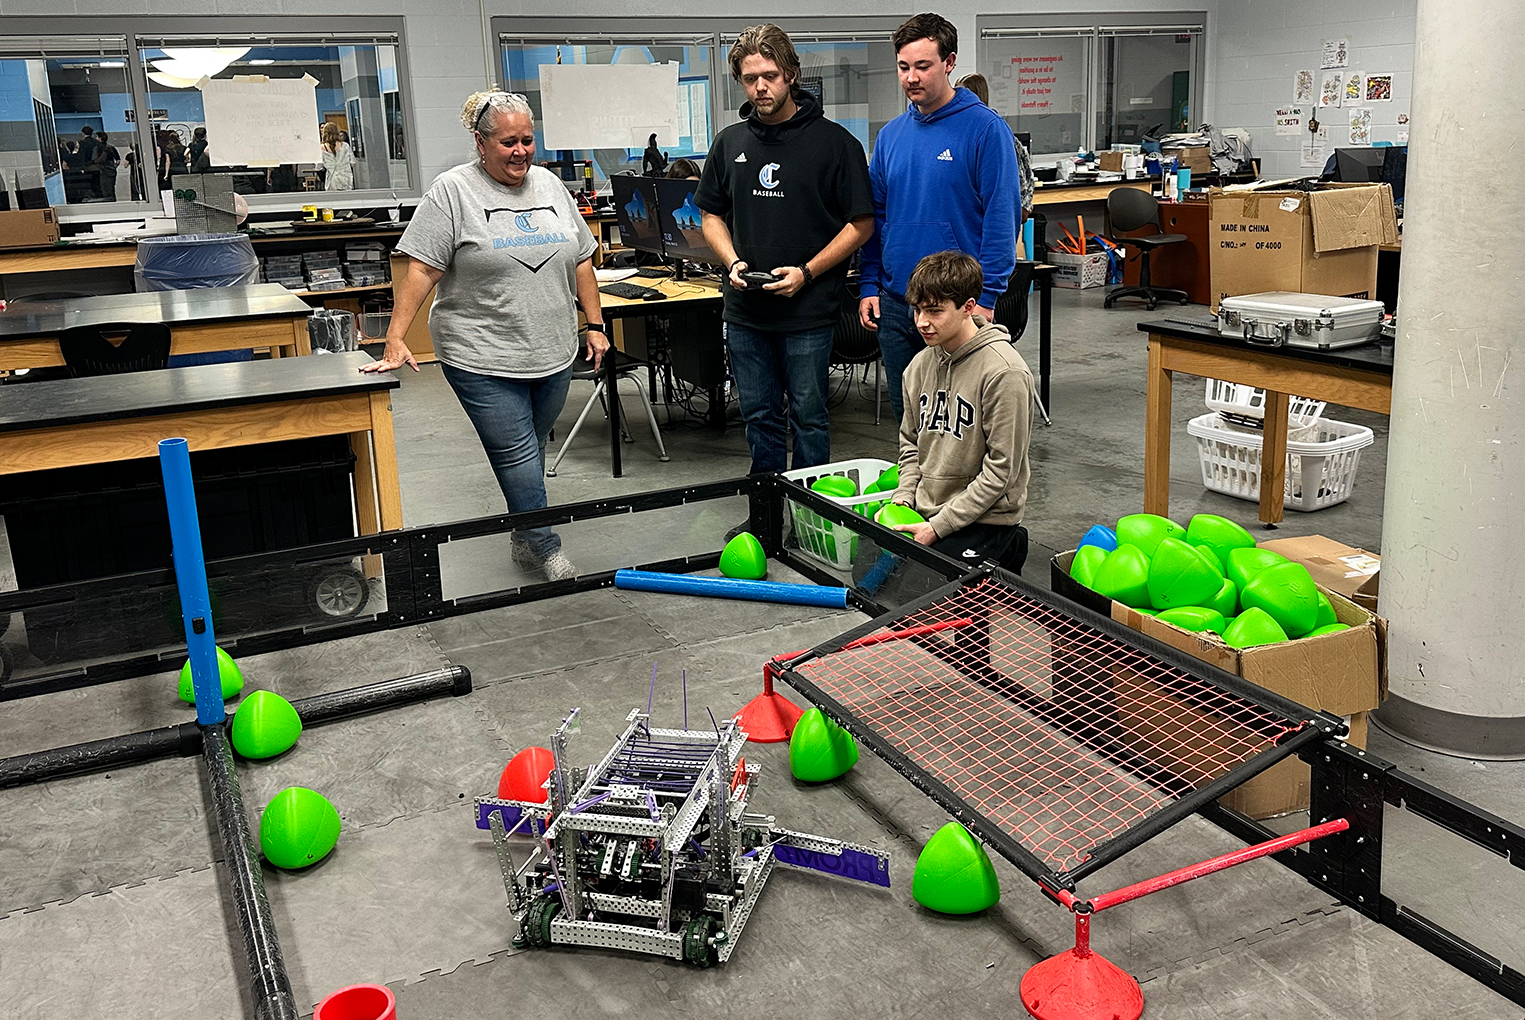 Laura Smith and members of her robotics team practice with the robots